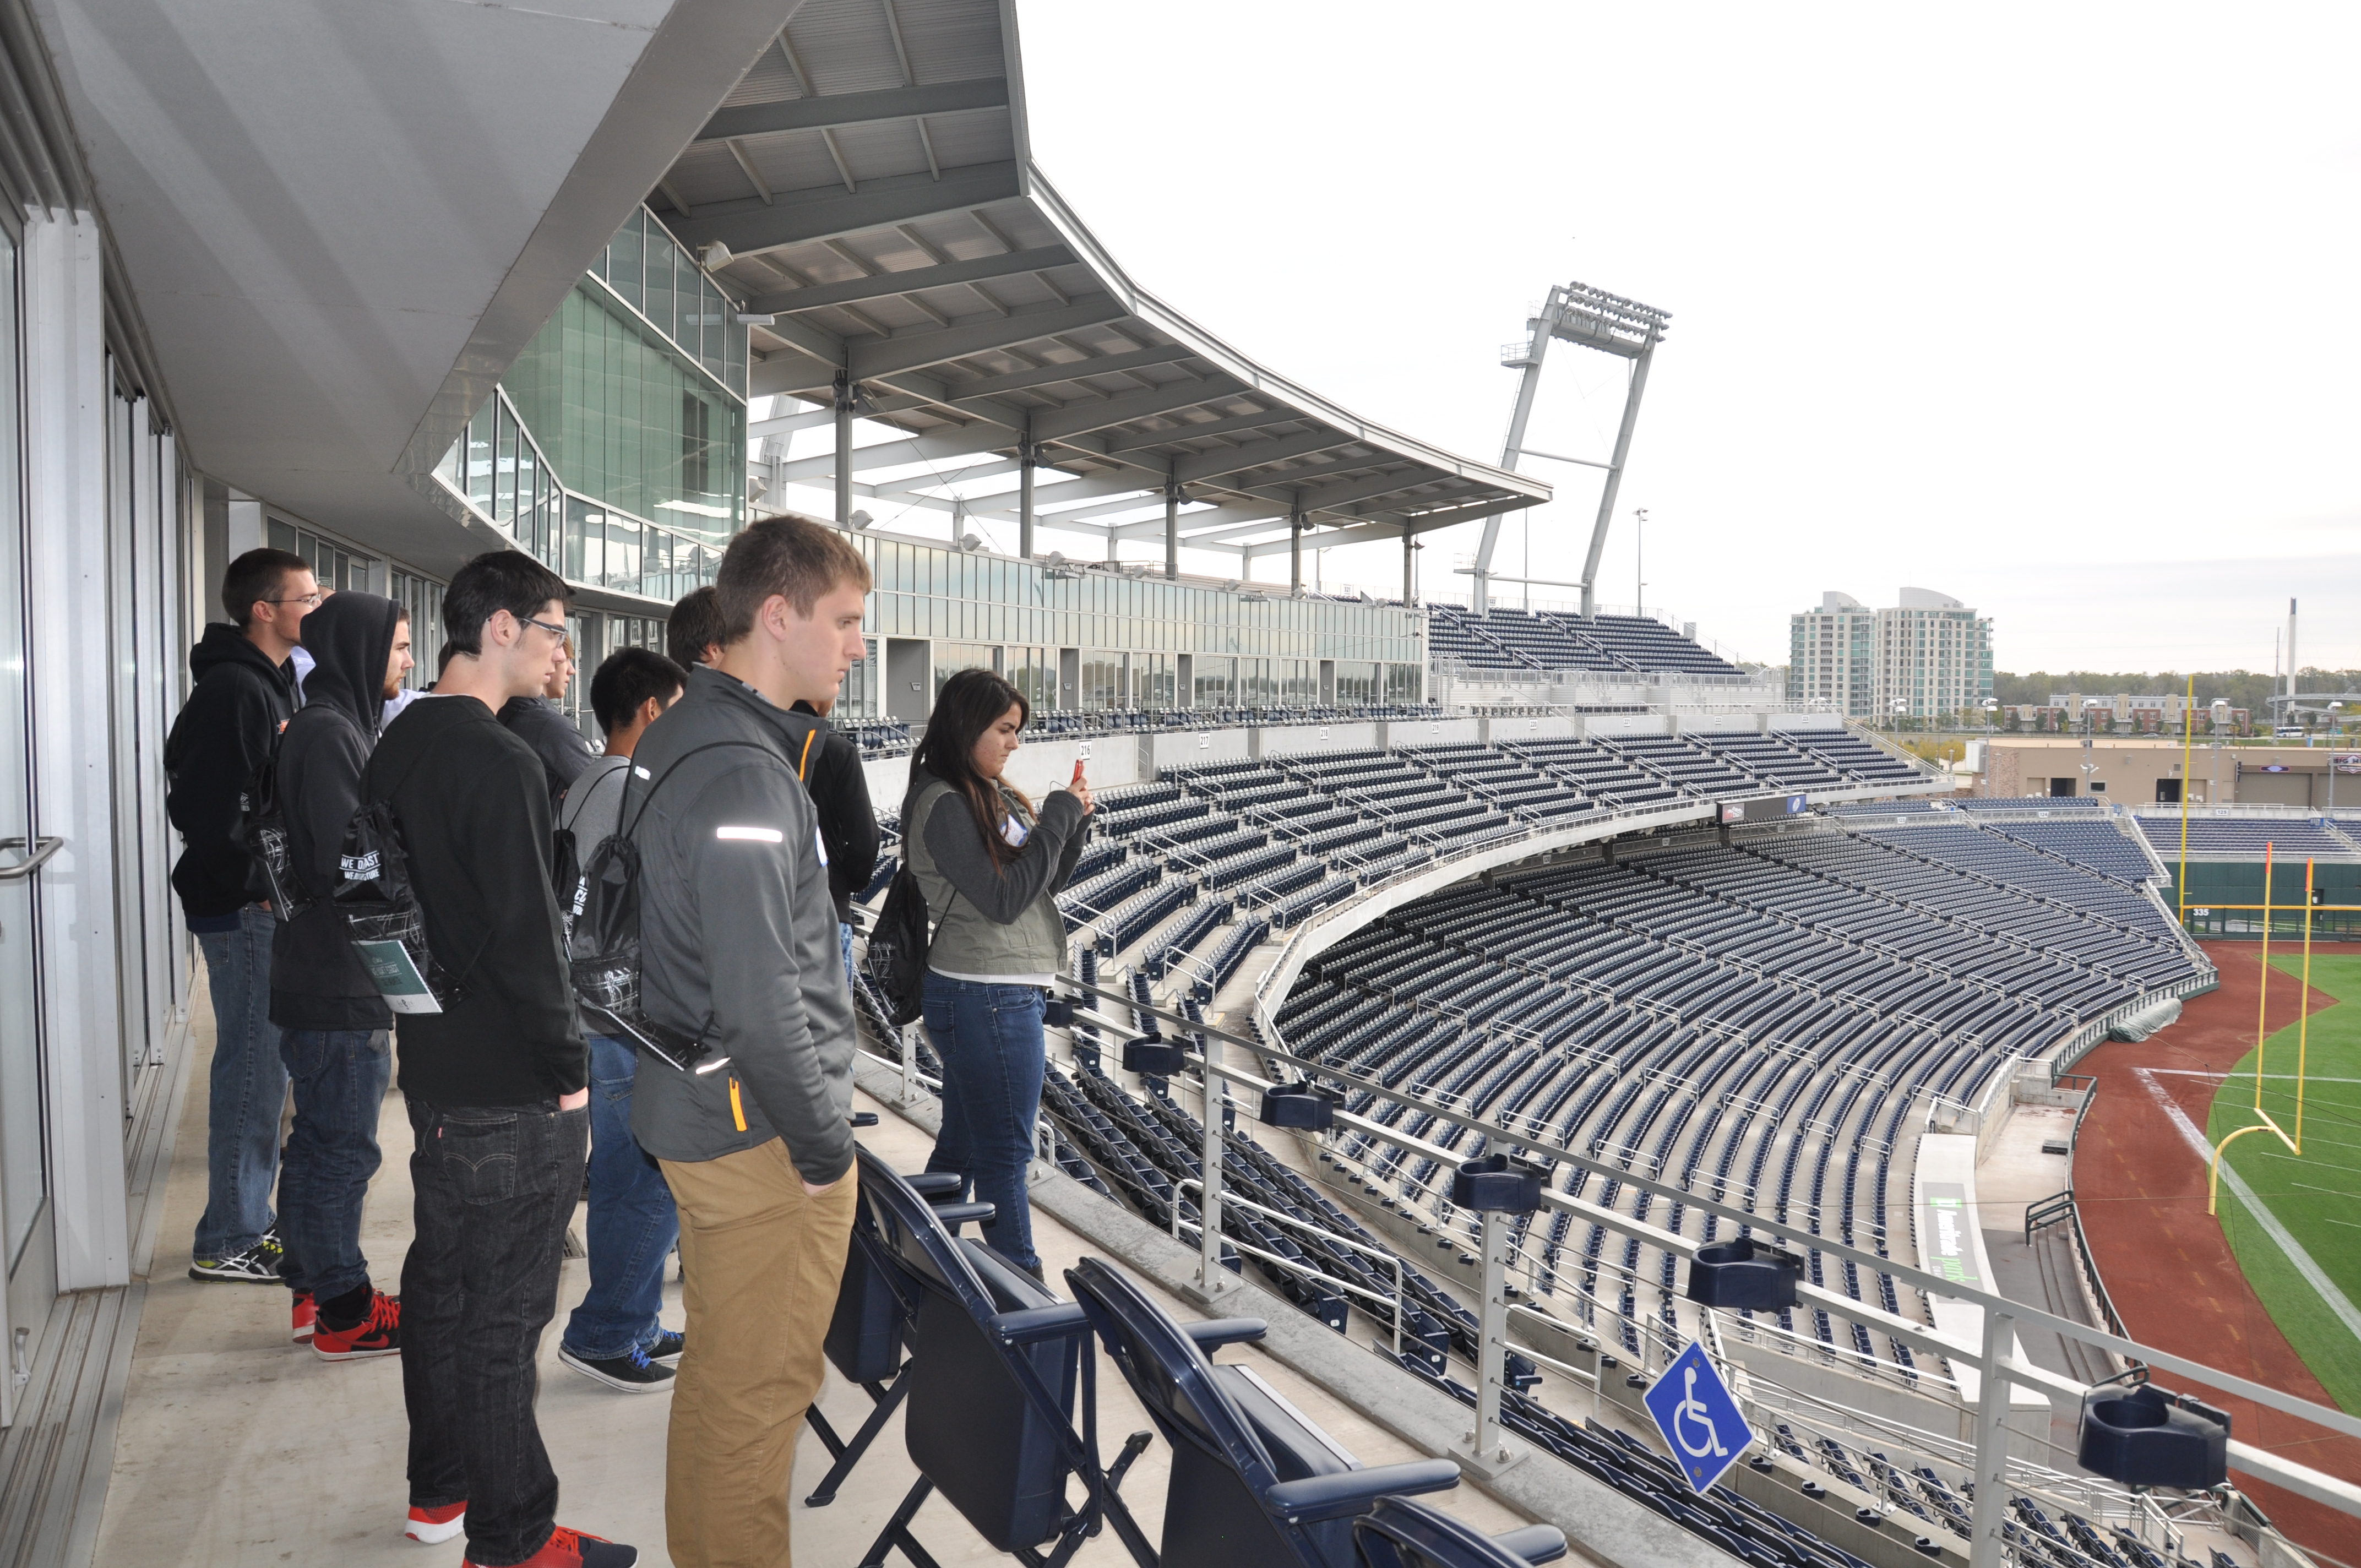 More than 600 first-year engineering students will begin their Industry Tours Day on Friday at TD Ameritrade Park in Omaha.